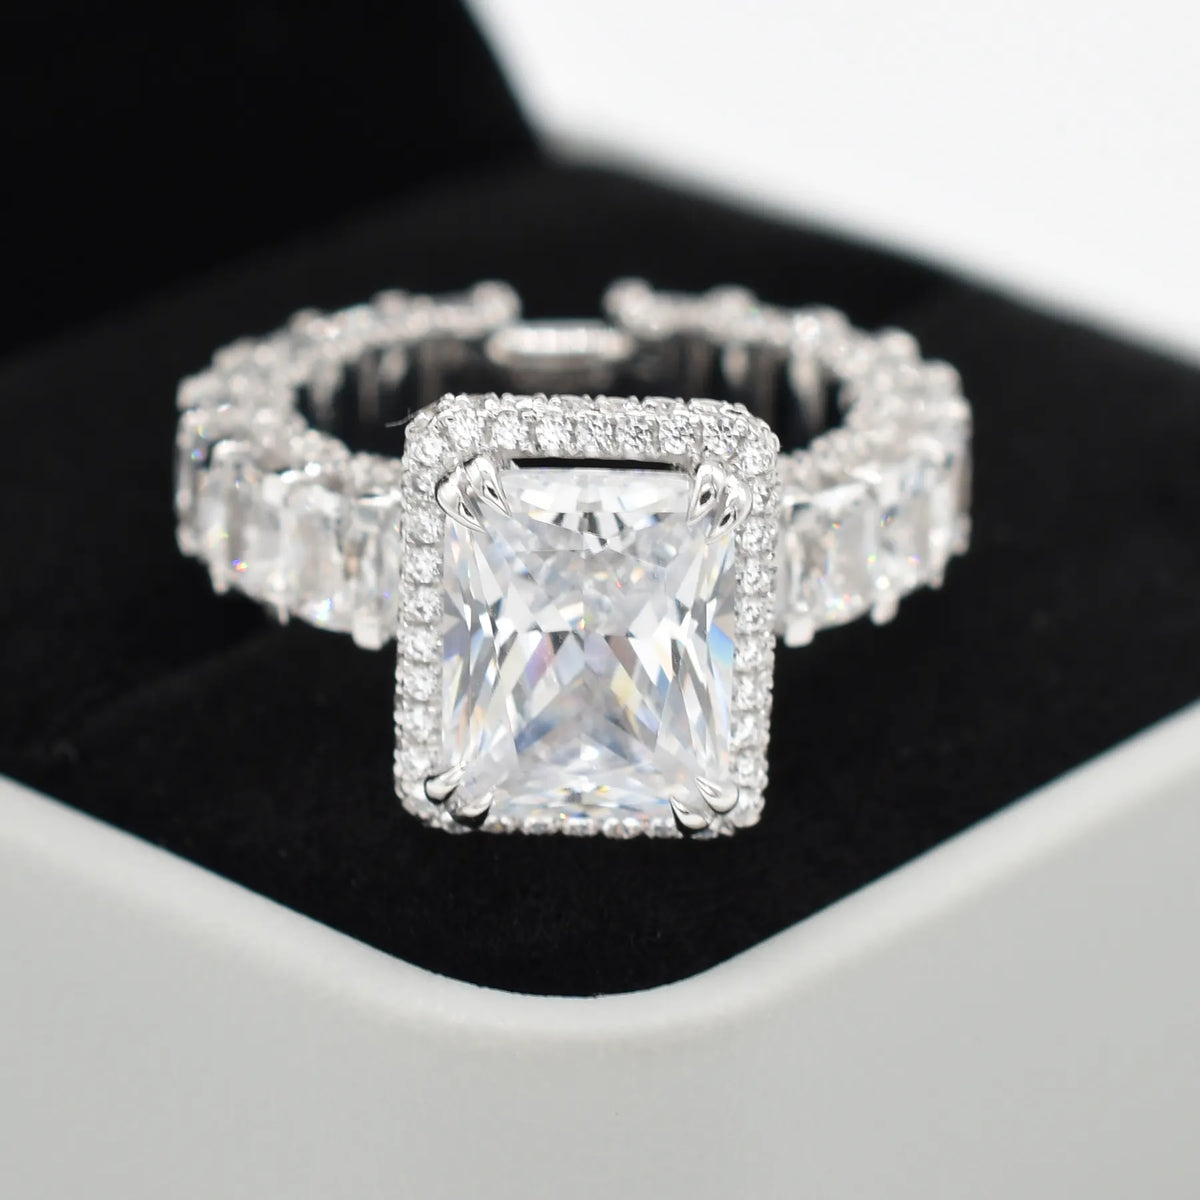 Asscher Cut Engagement Ring With Cushion Cut Wide Band Platinum/14K White Gold Lab Grown Diamond Ring For Women